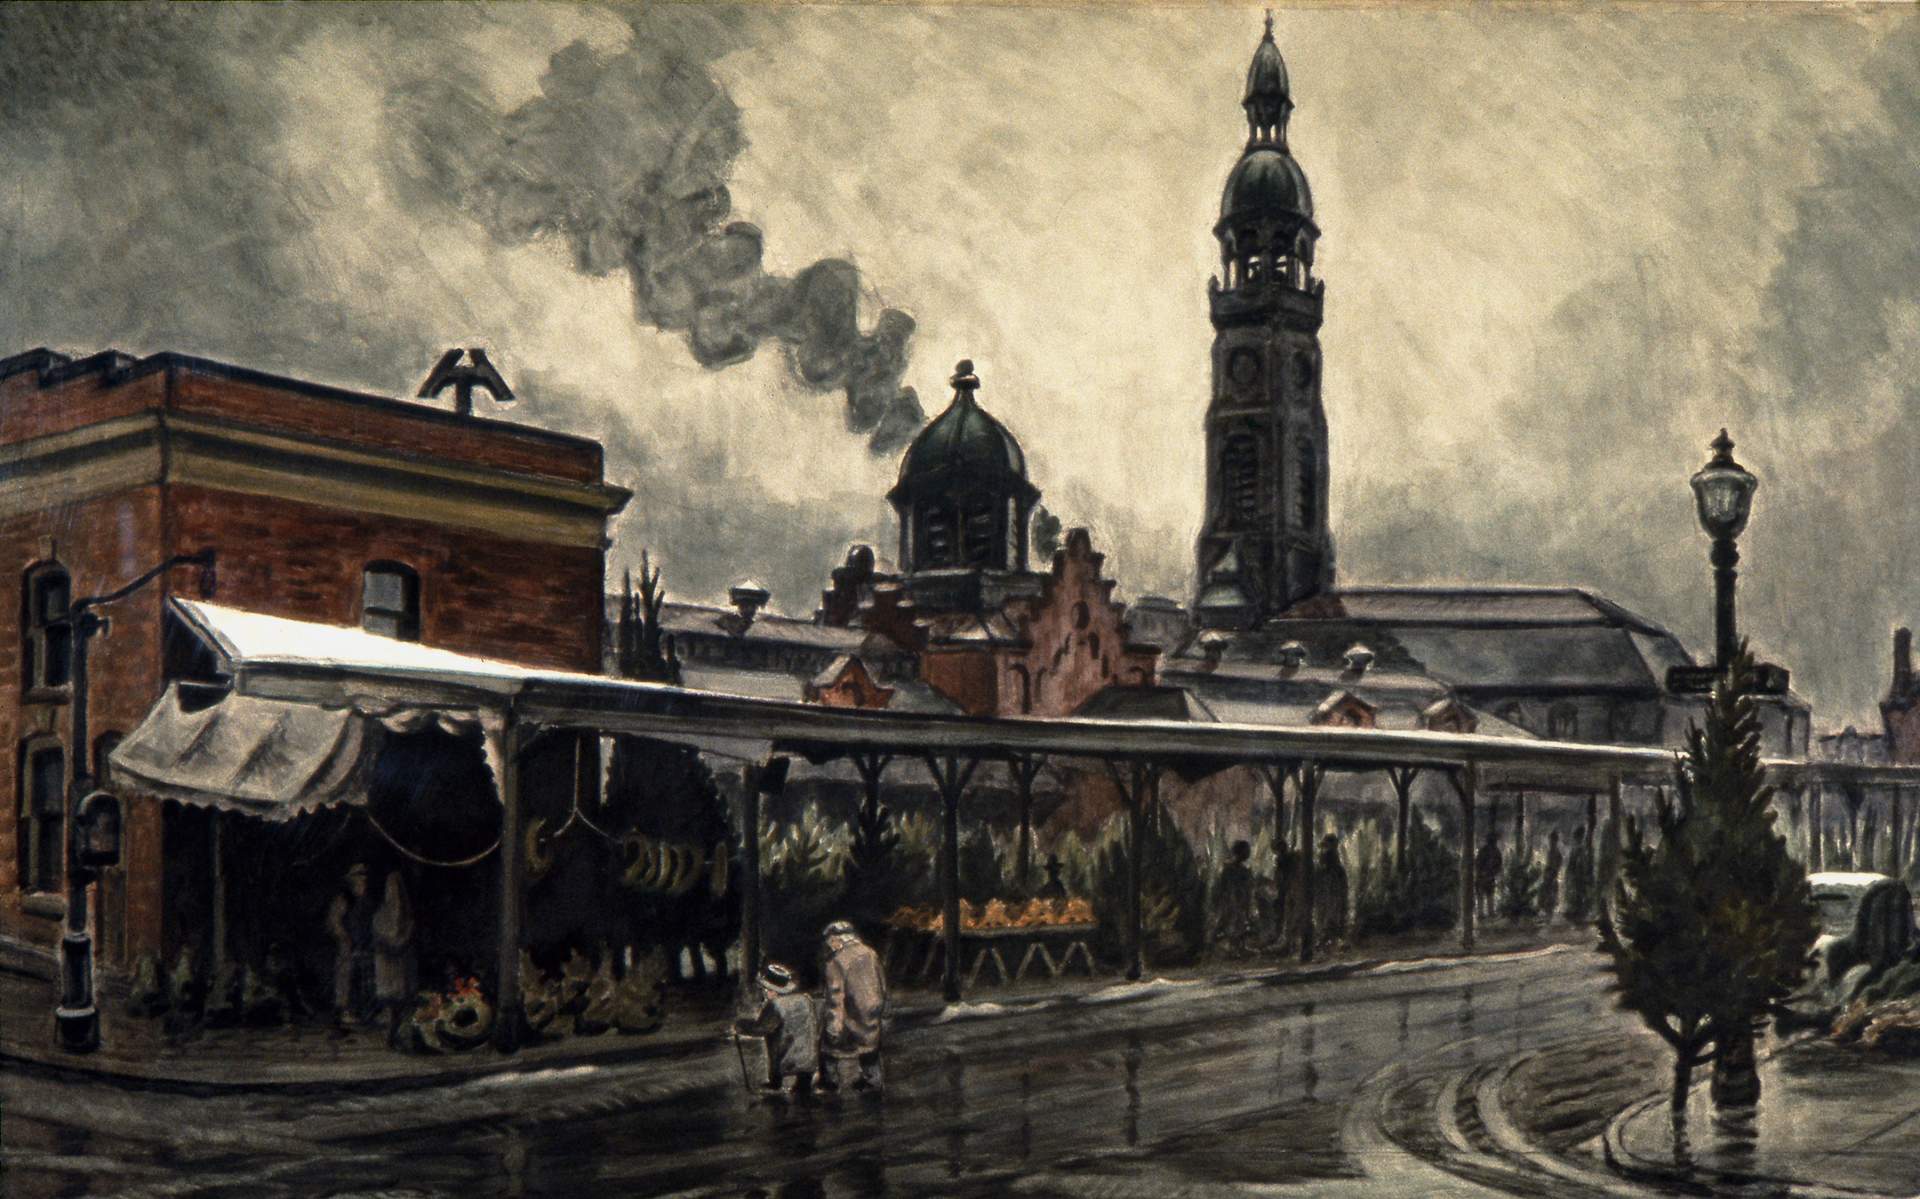 The Market at Christmastime